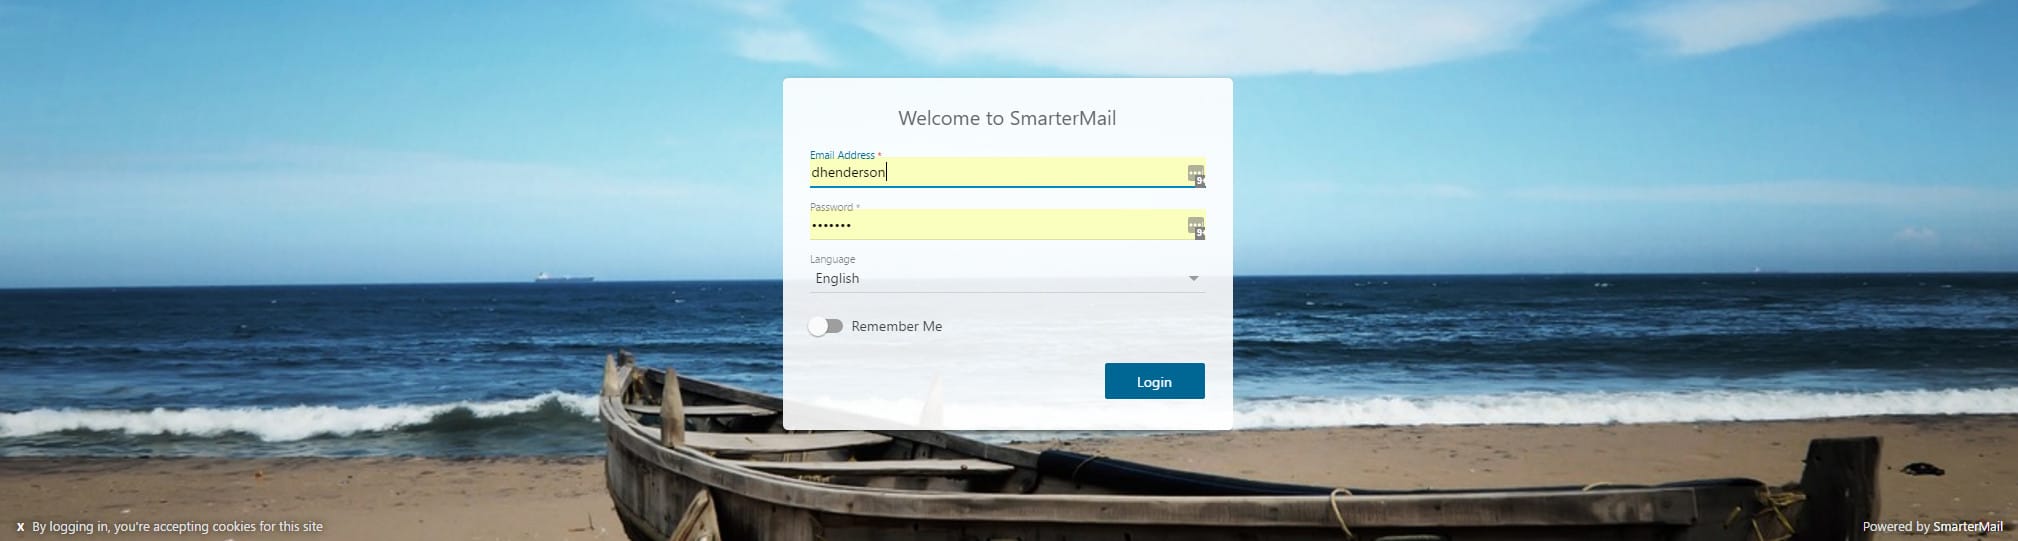 Smartermail New WebMail Interface